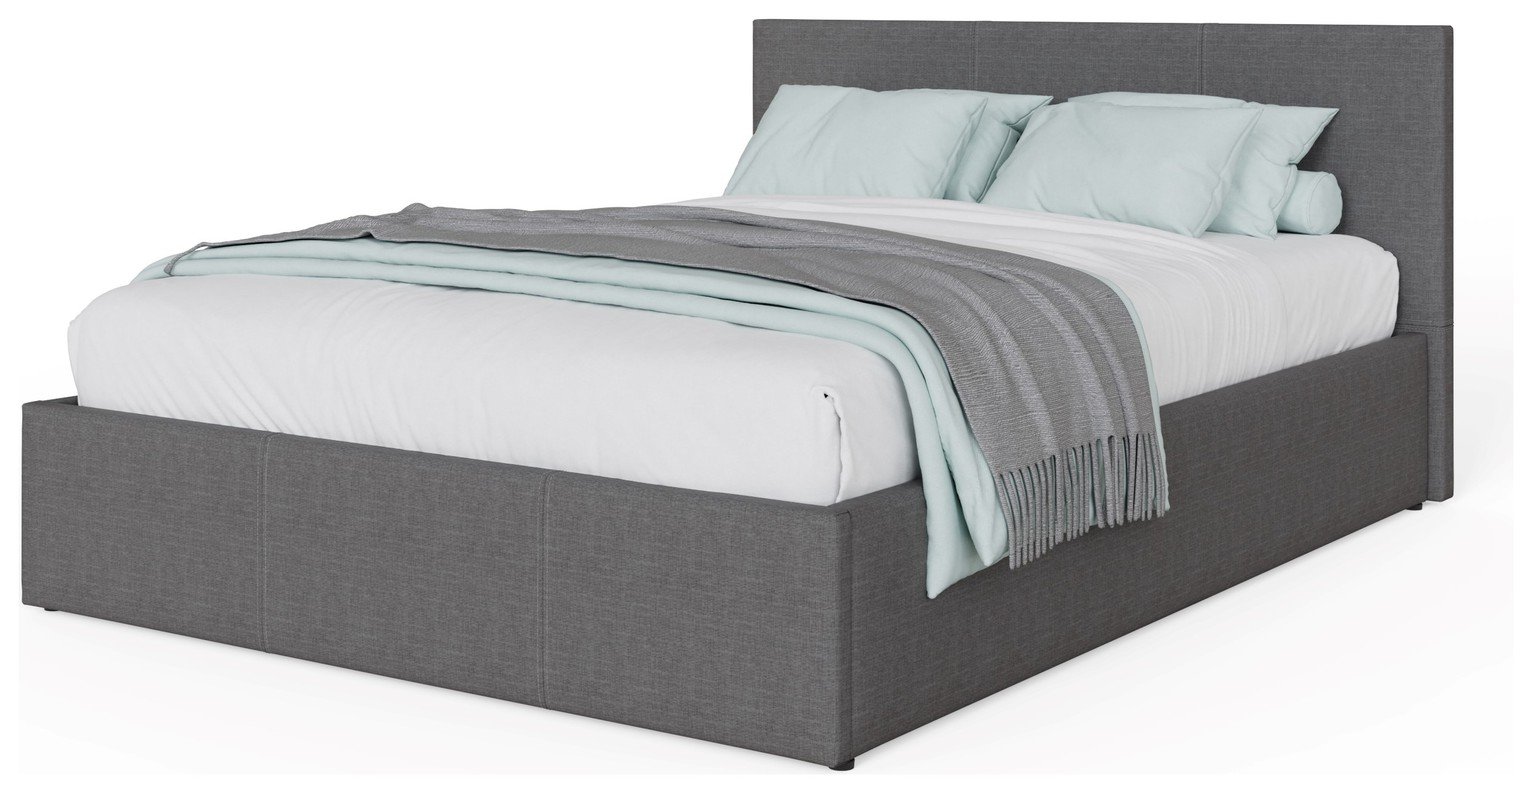 GFW Kingsize End Lift Ottoman Fabric Bed Frame - Grey